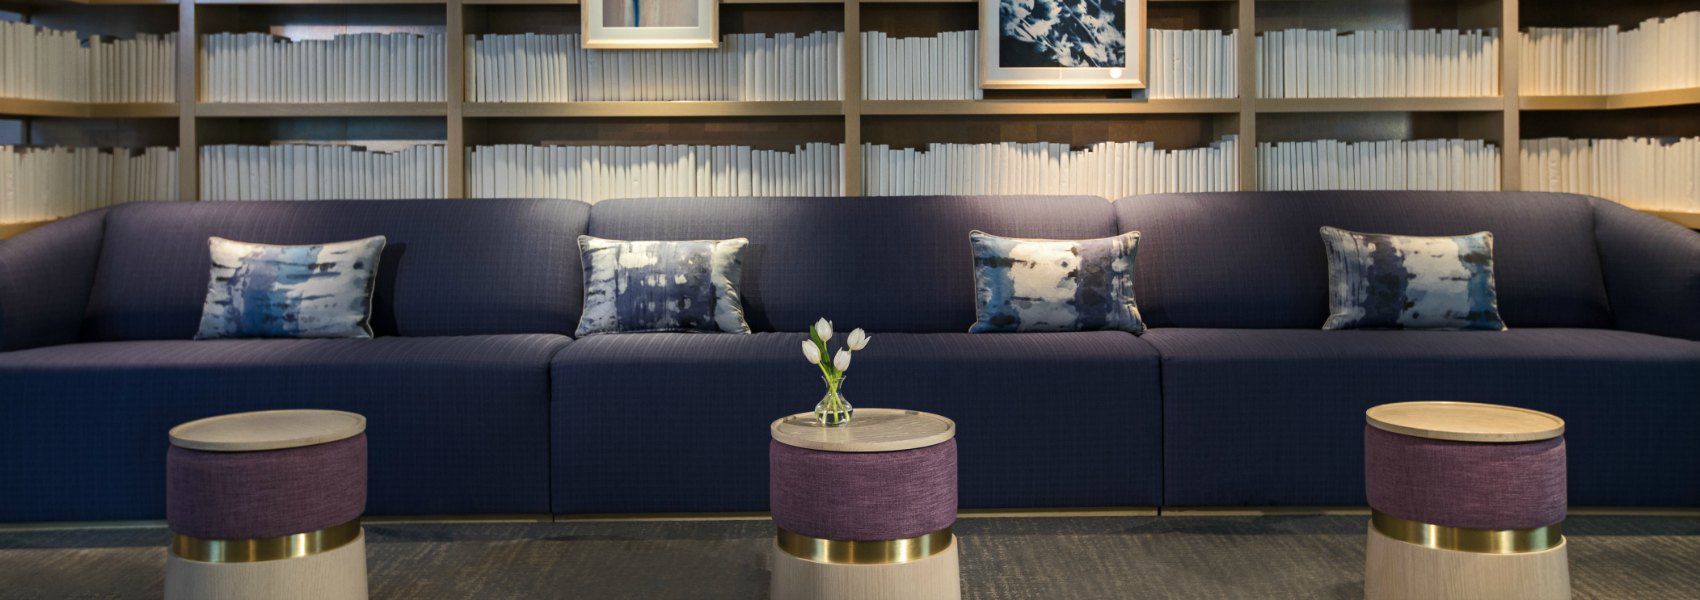 triple wide purple couch in front of a wall to wall bookshelf with white books